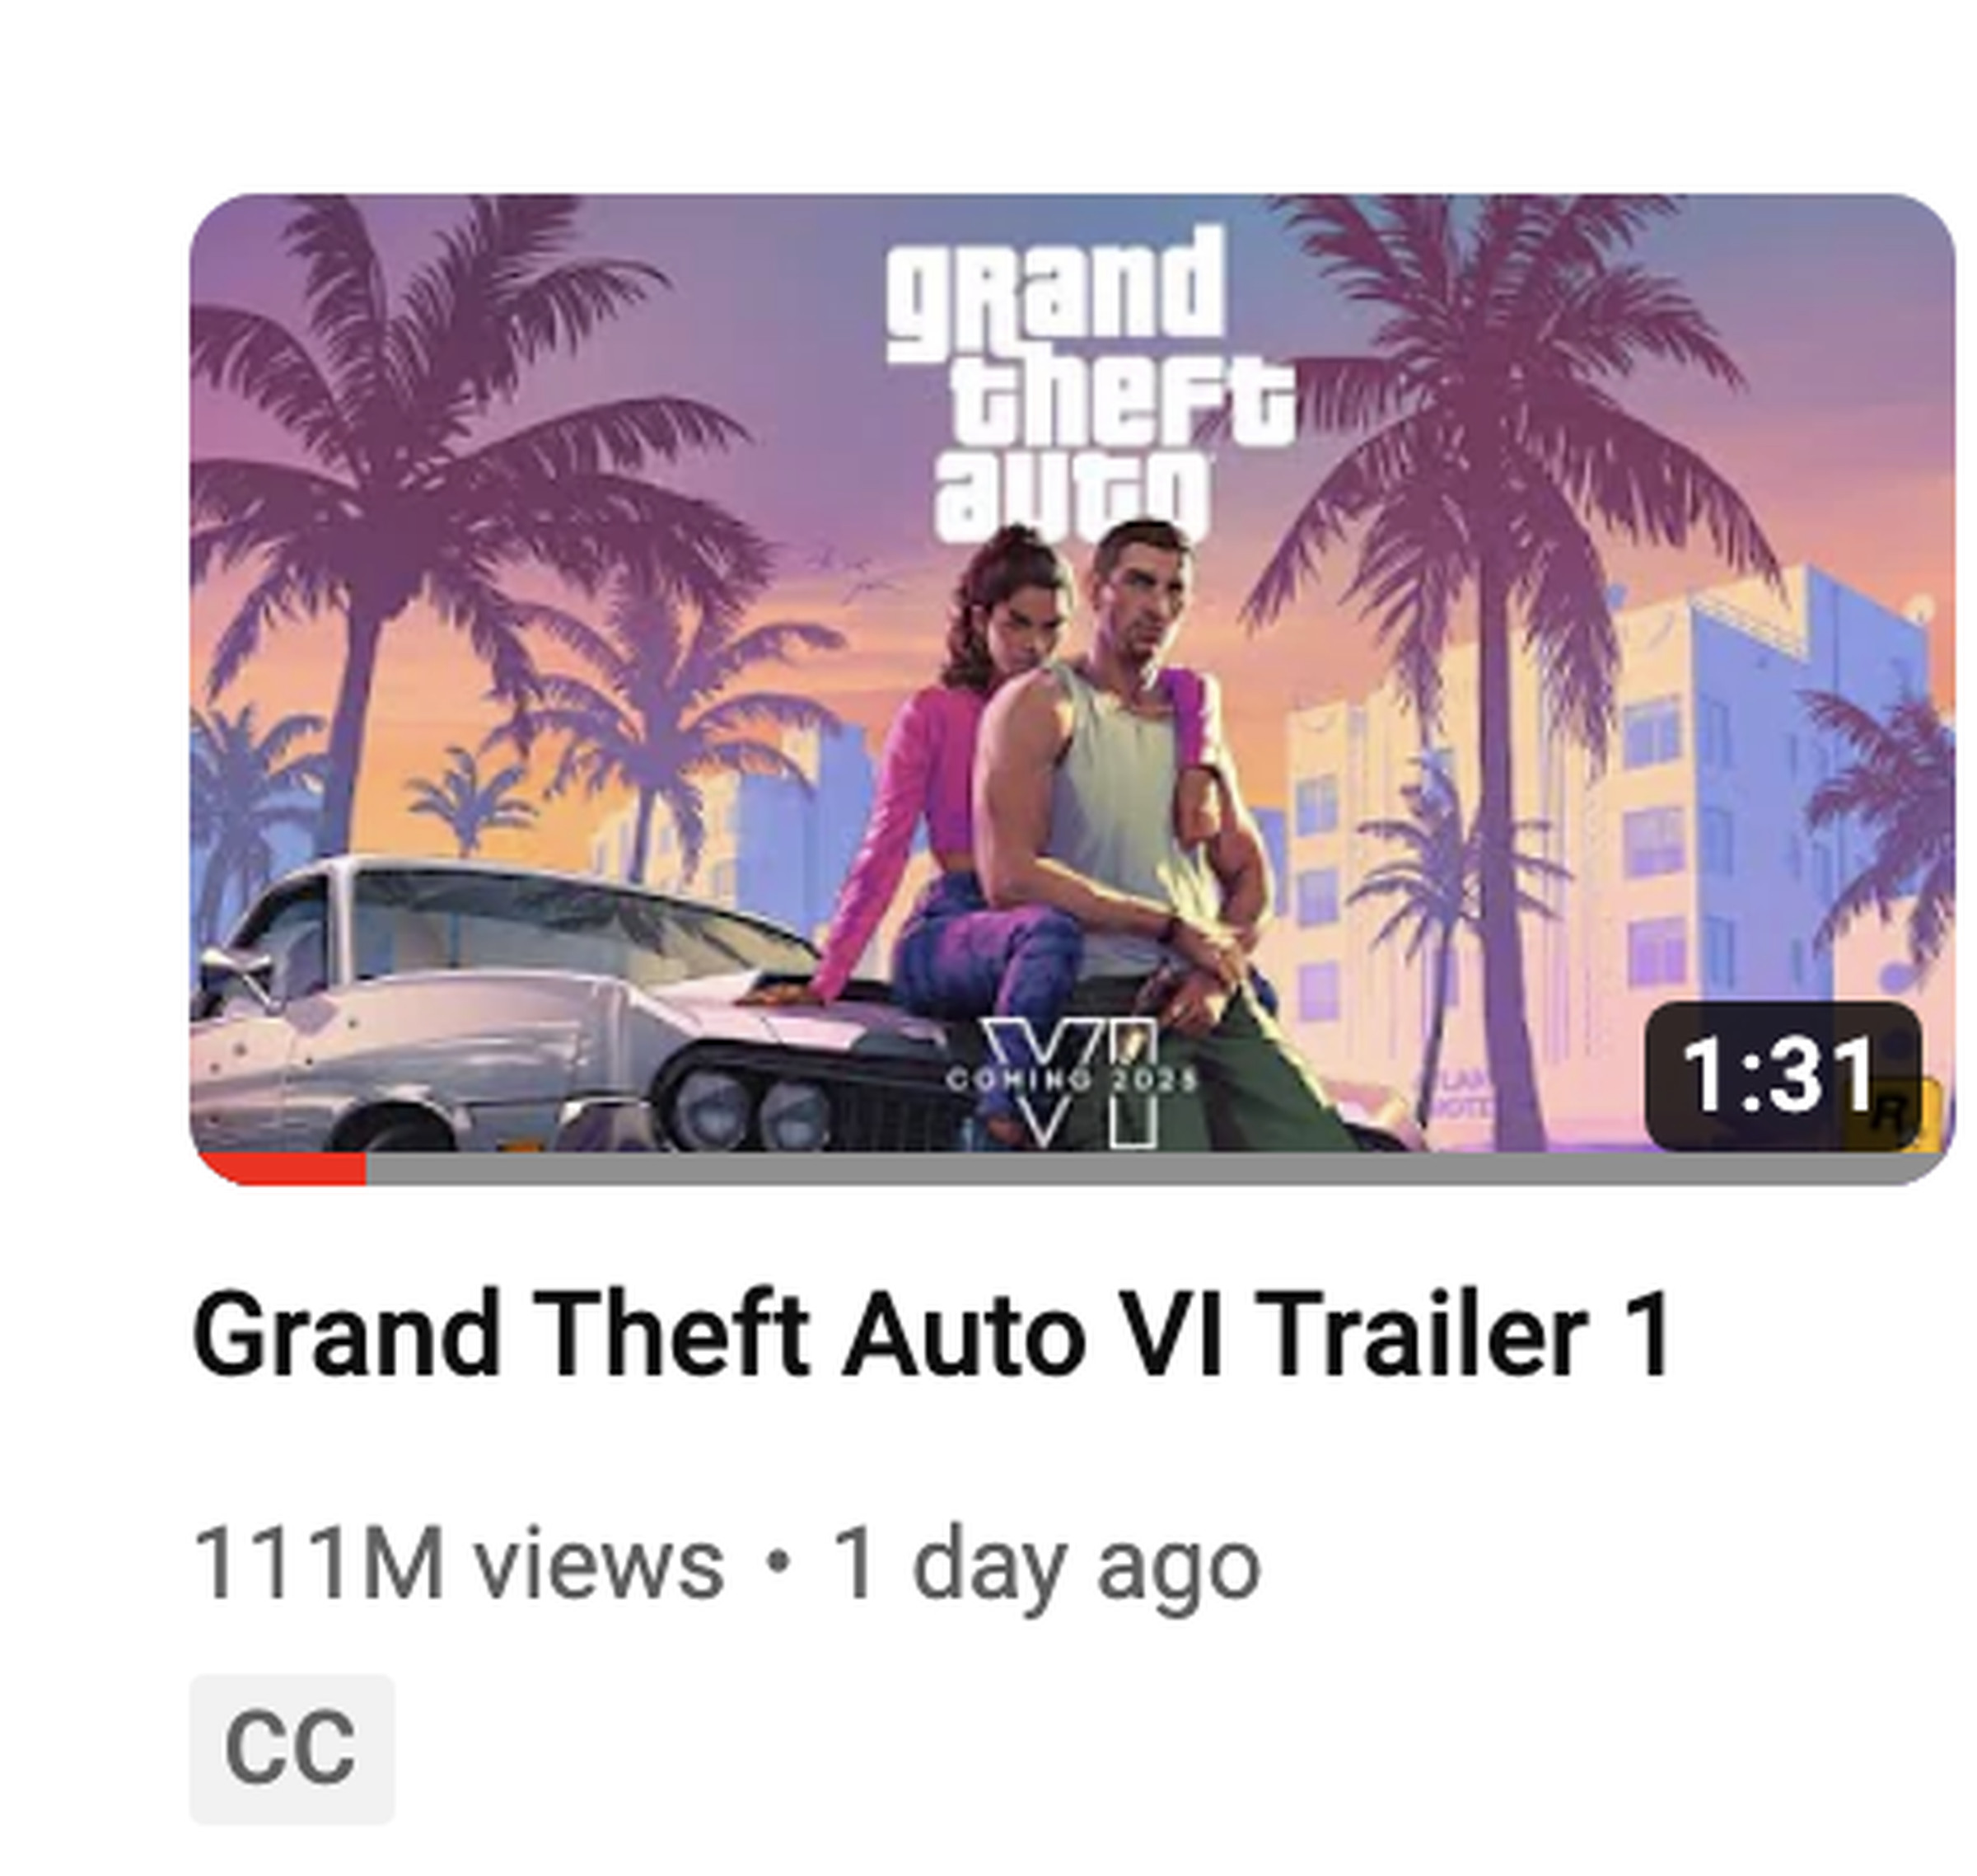 Screenshot of YouTube thumbnail featuring the view number for the GTA VI trailer which is 111 million views.